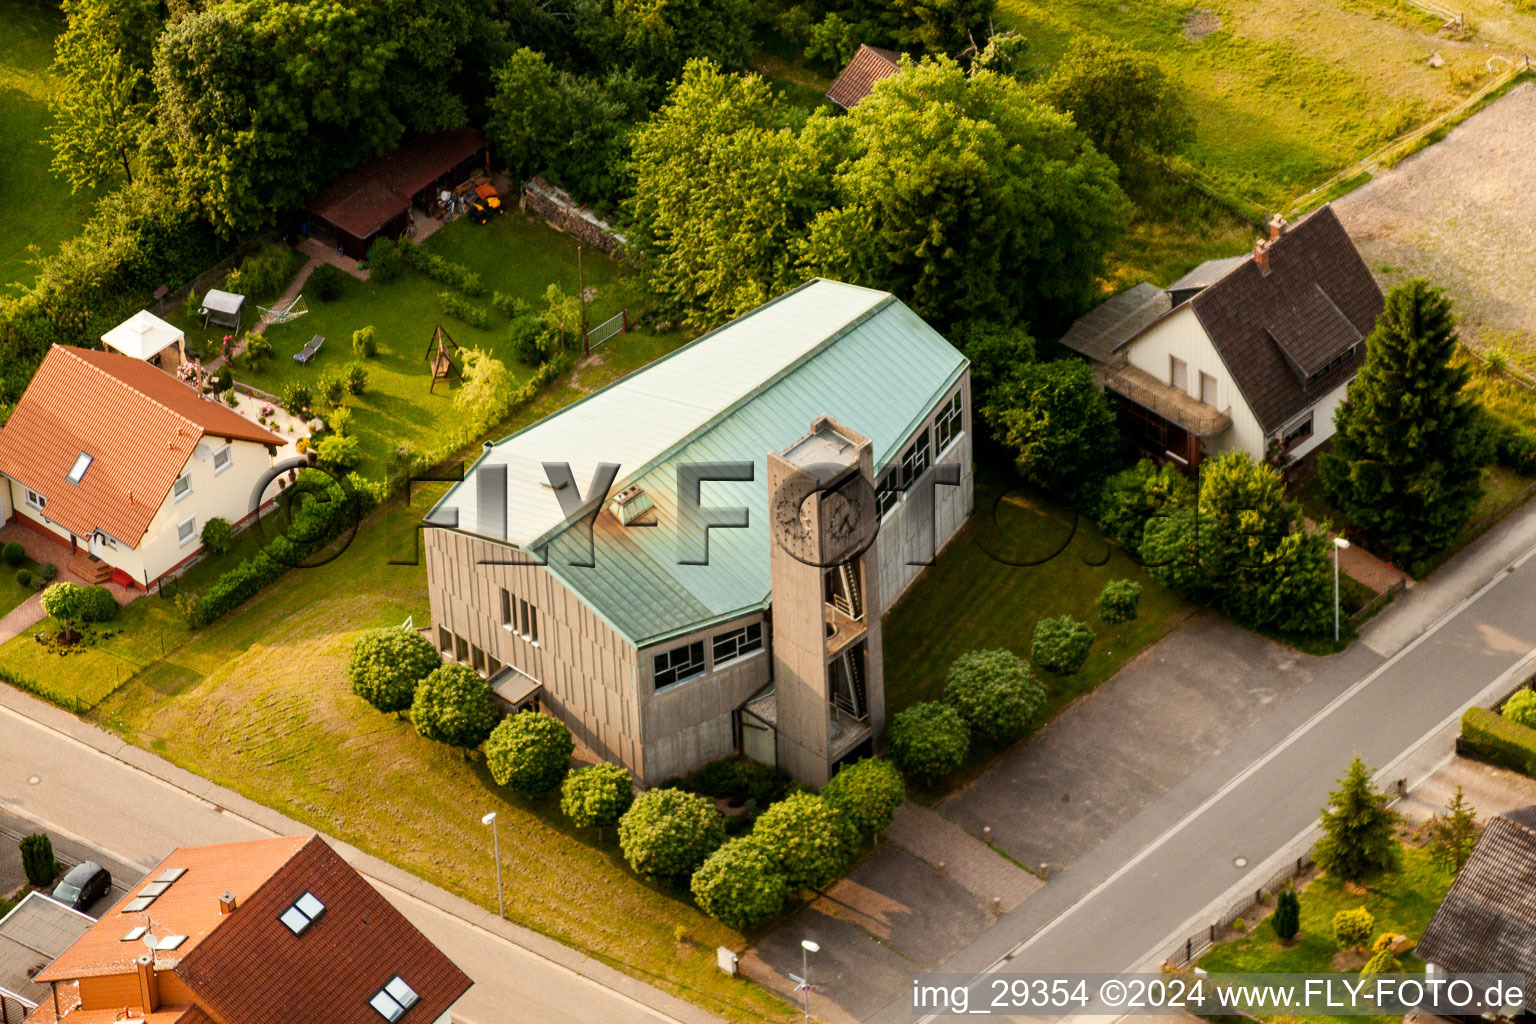 Church building in the village of in the district Gersbach in Pirmasens in the state Rhineland-Palatinate, Germany